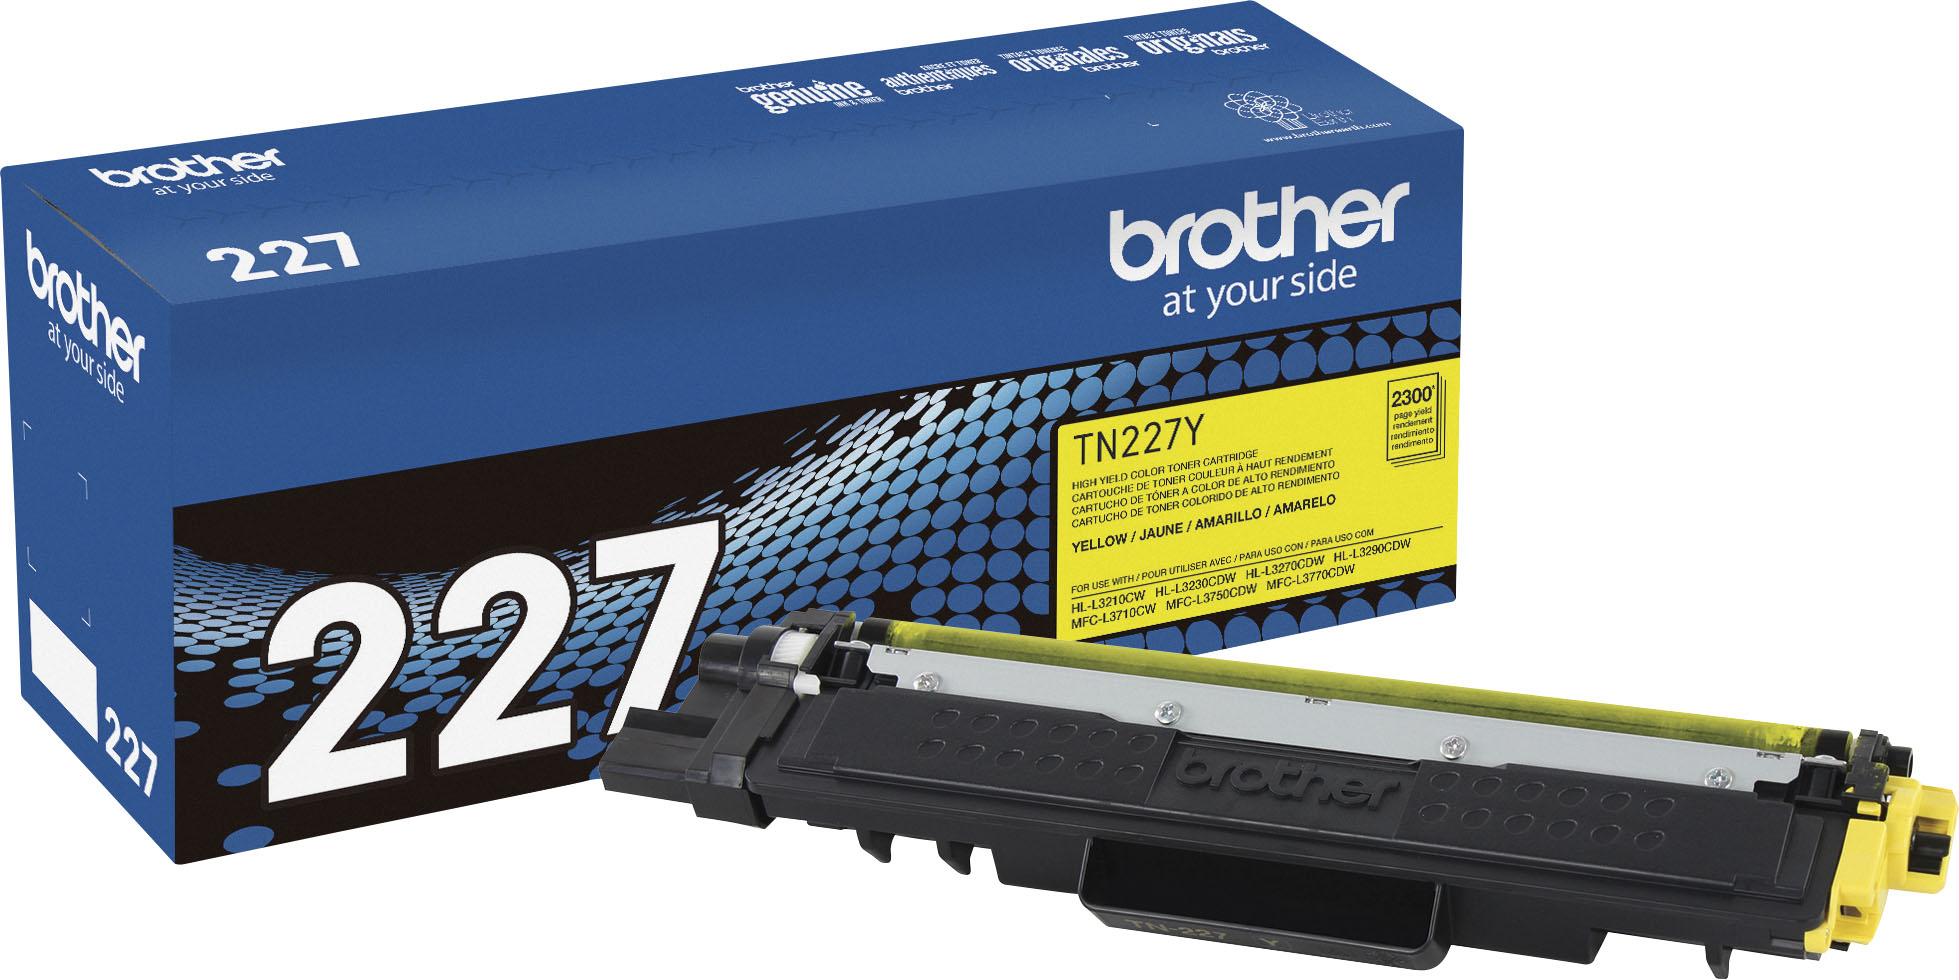 Compatible Brother TN-247 Toner Cartridges by Yellow Yeti 